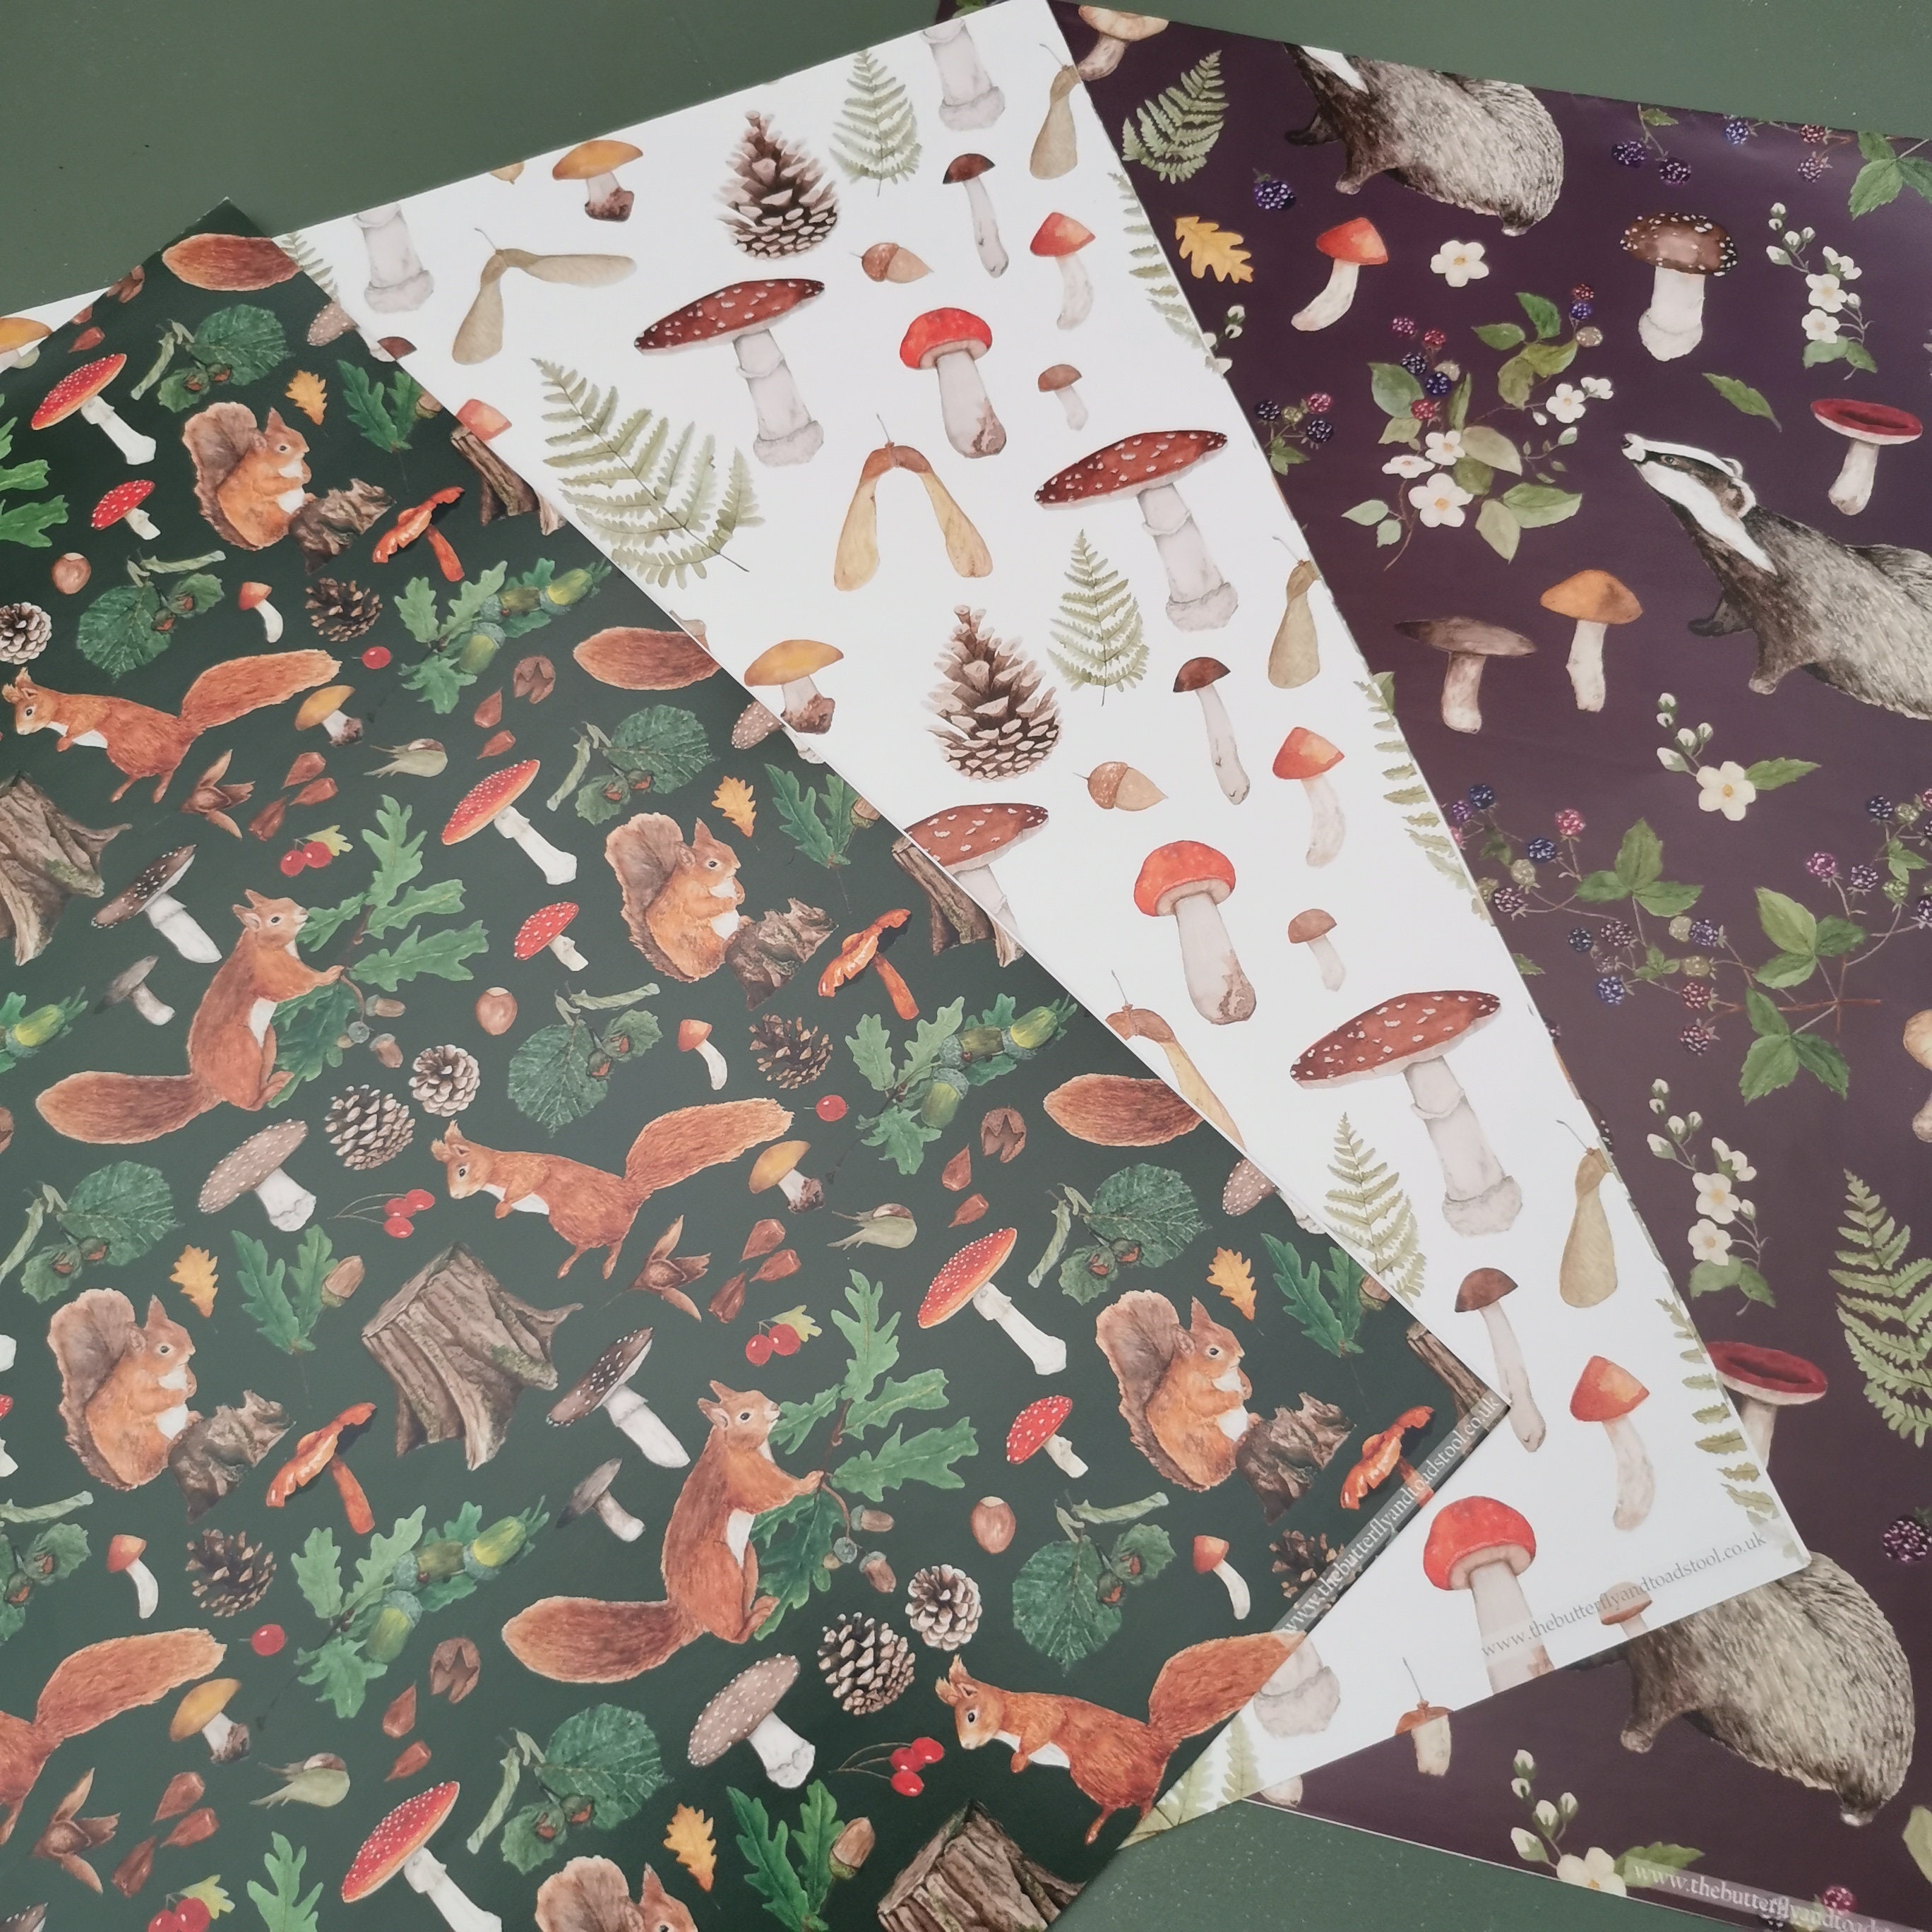 mushroom forrest Wrapping Paper by Rosewood Apothecary